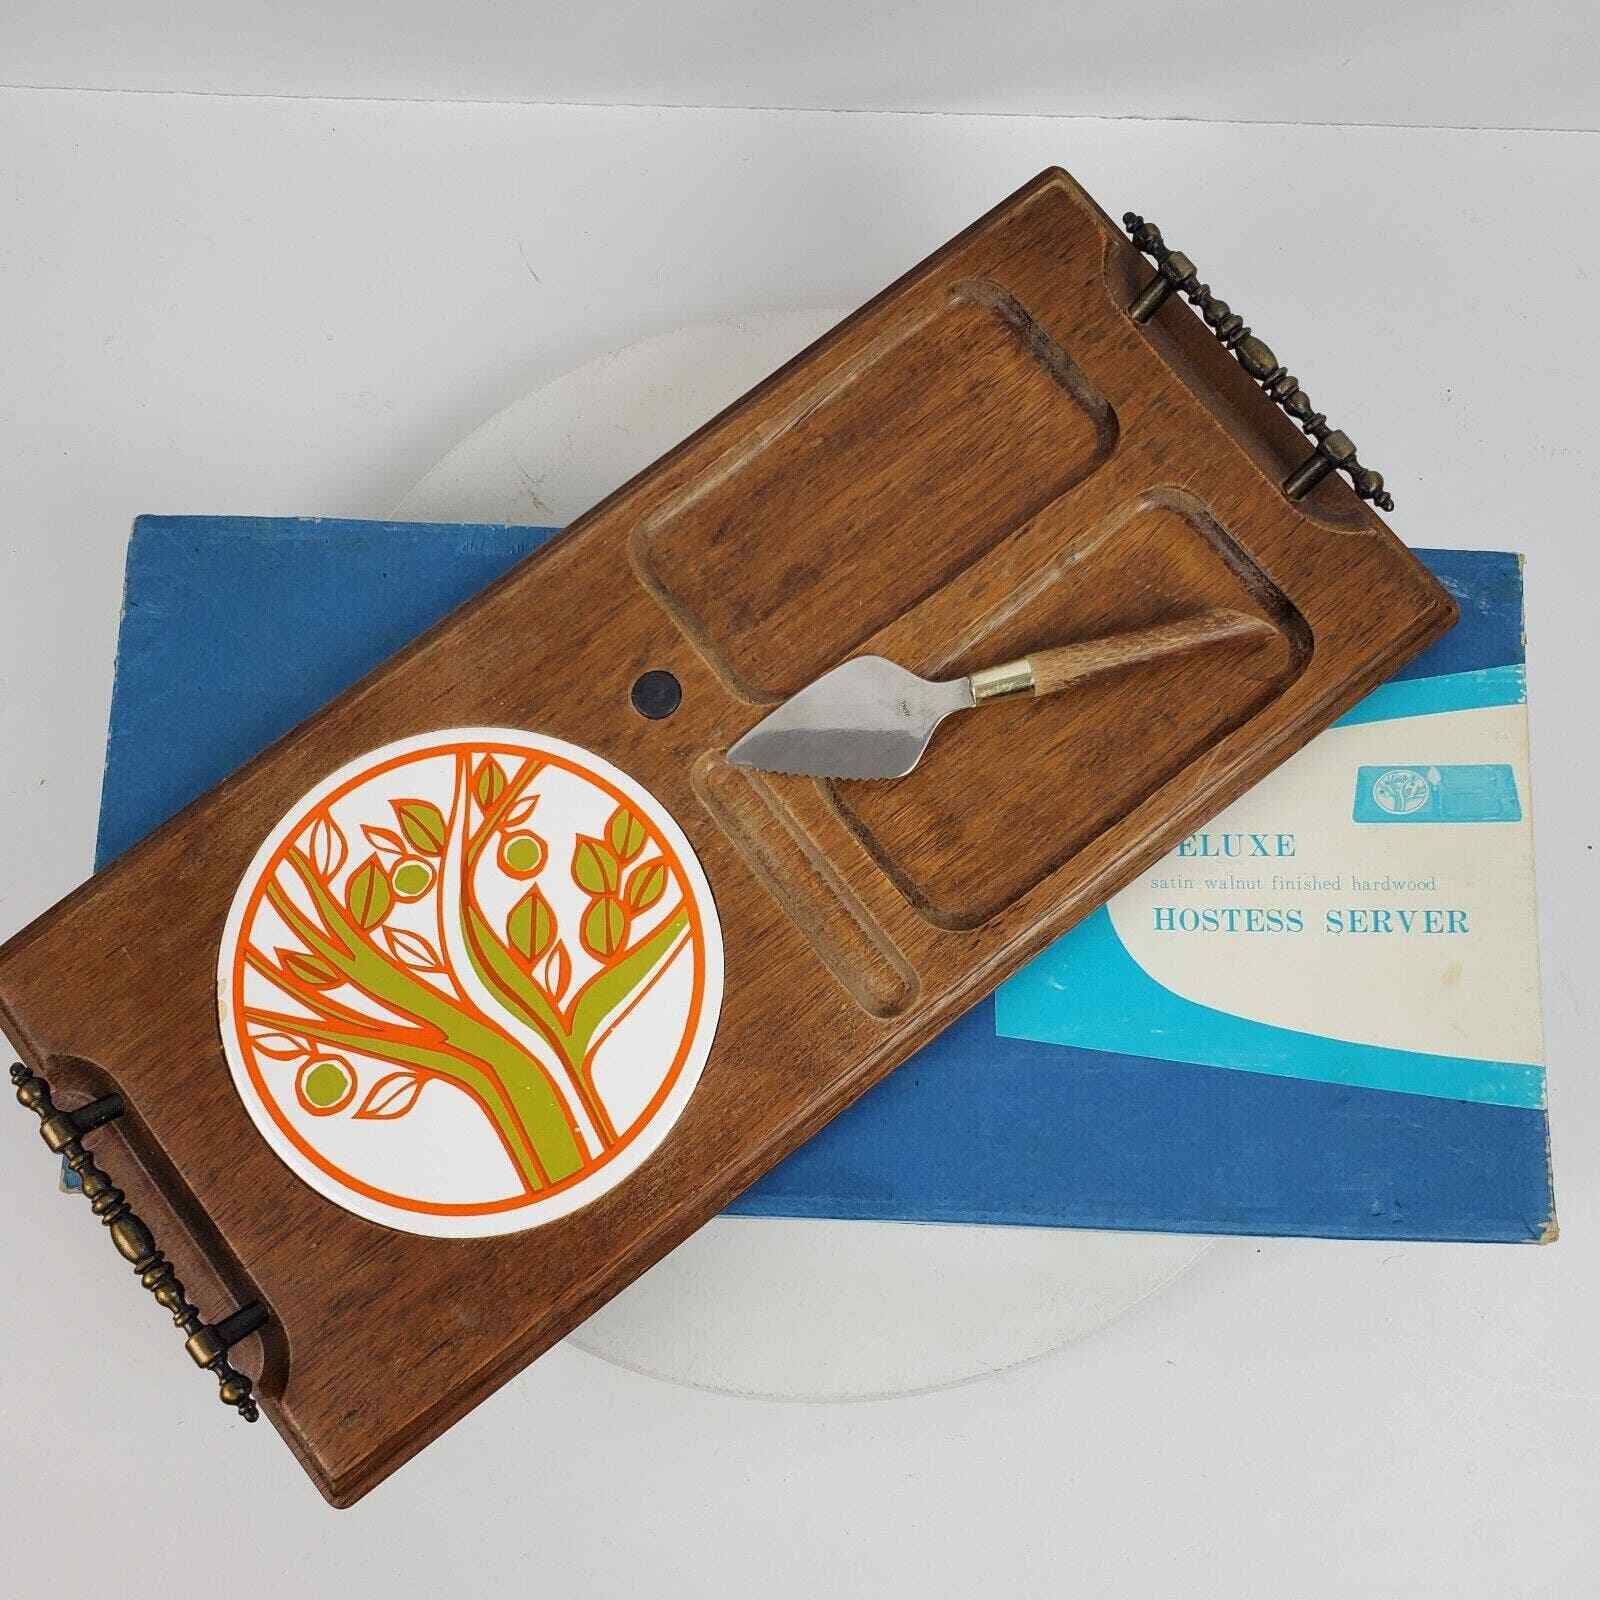 Vintage 1970s Imperial Deluxe Hostess Server Walnut Finish 17x8 Inch w/ Box